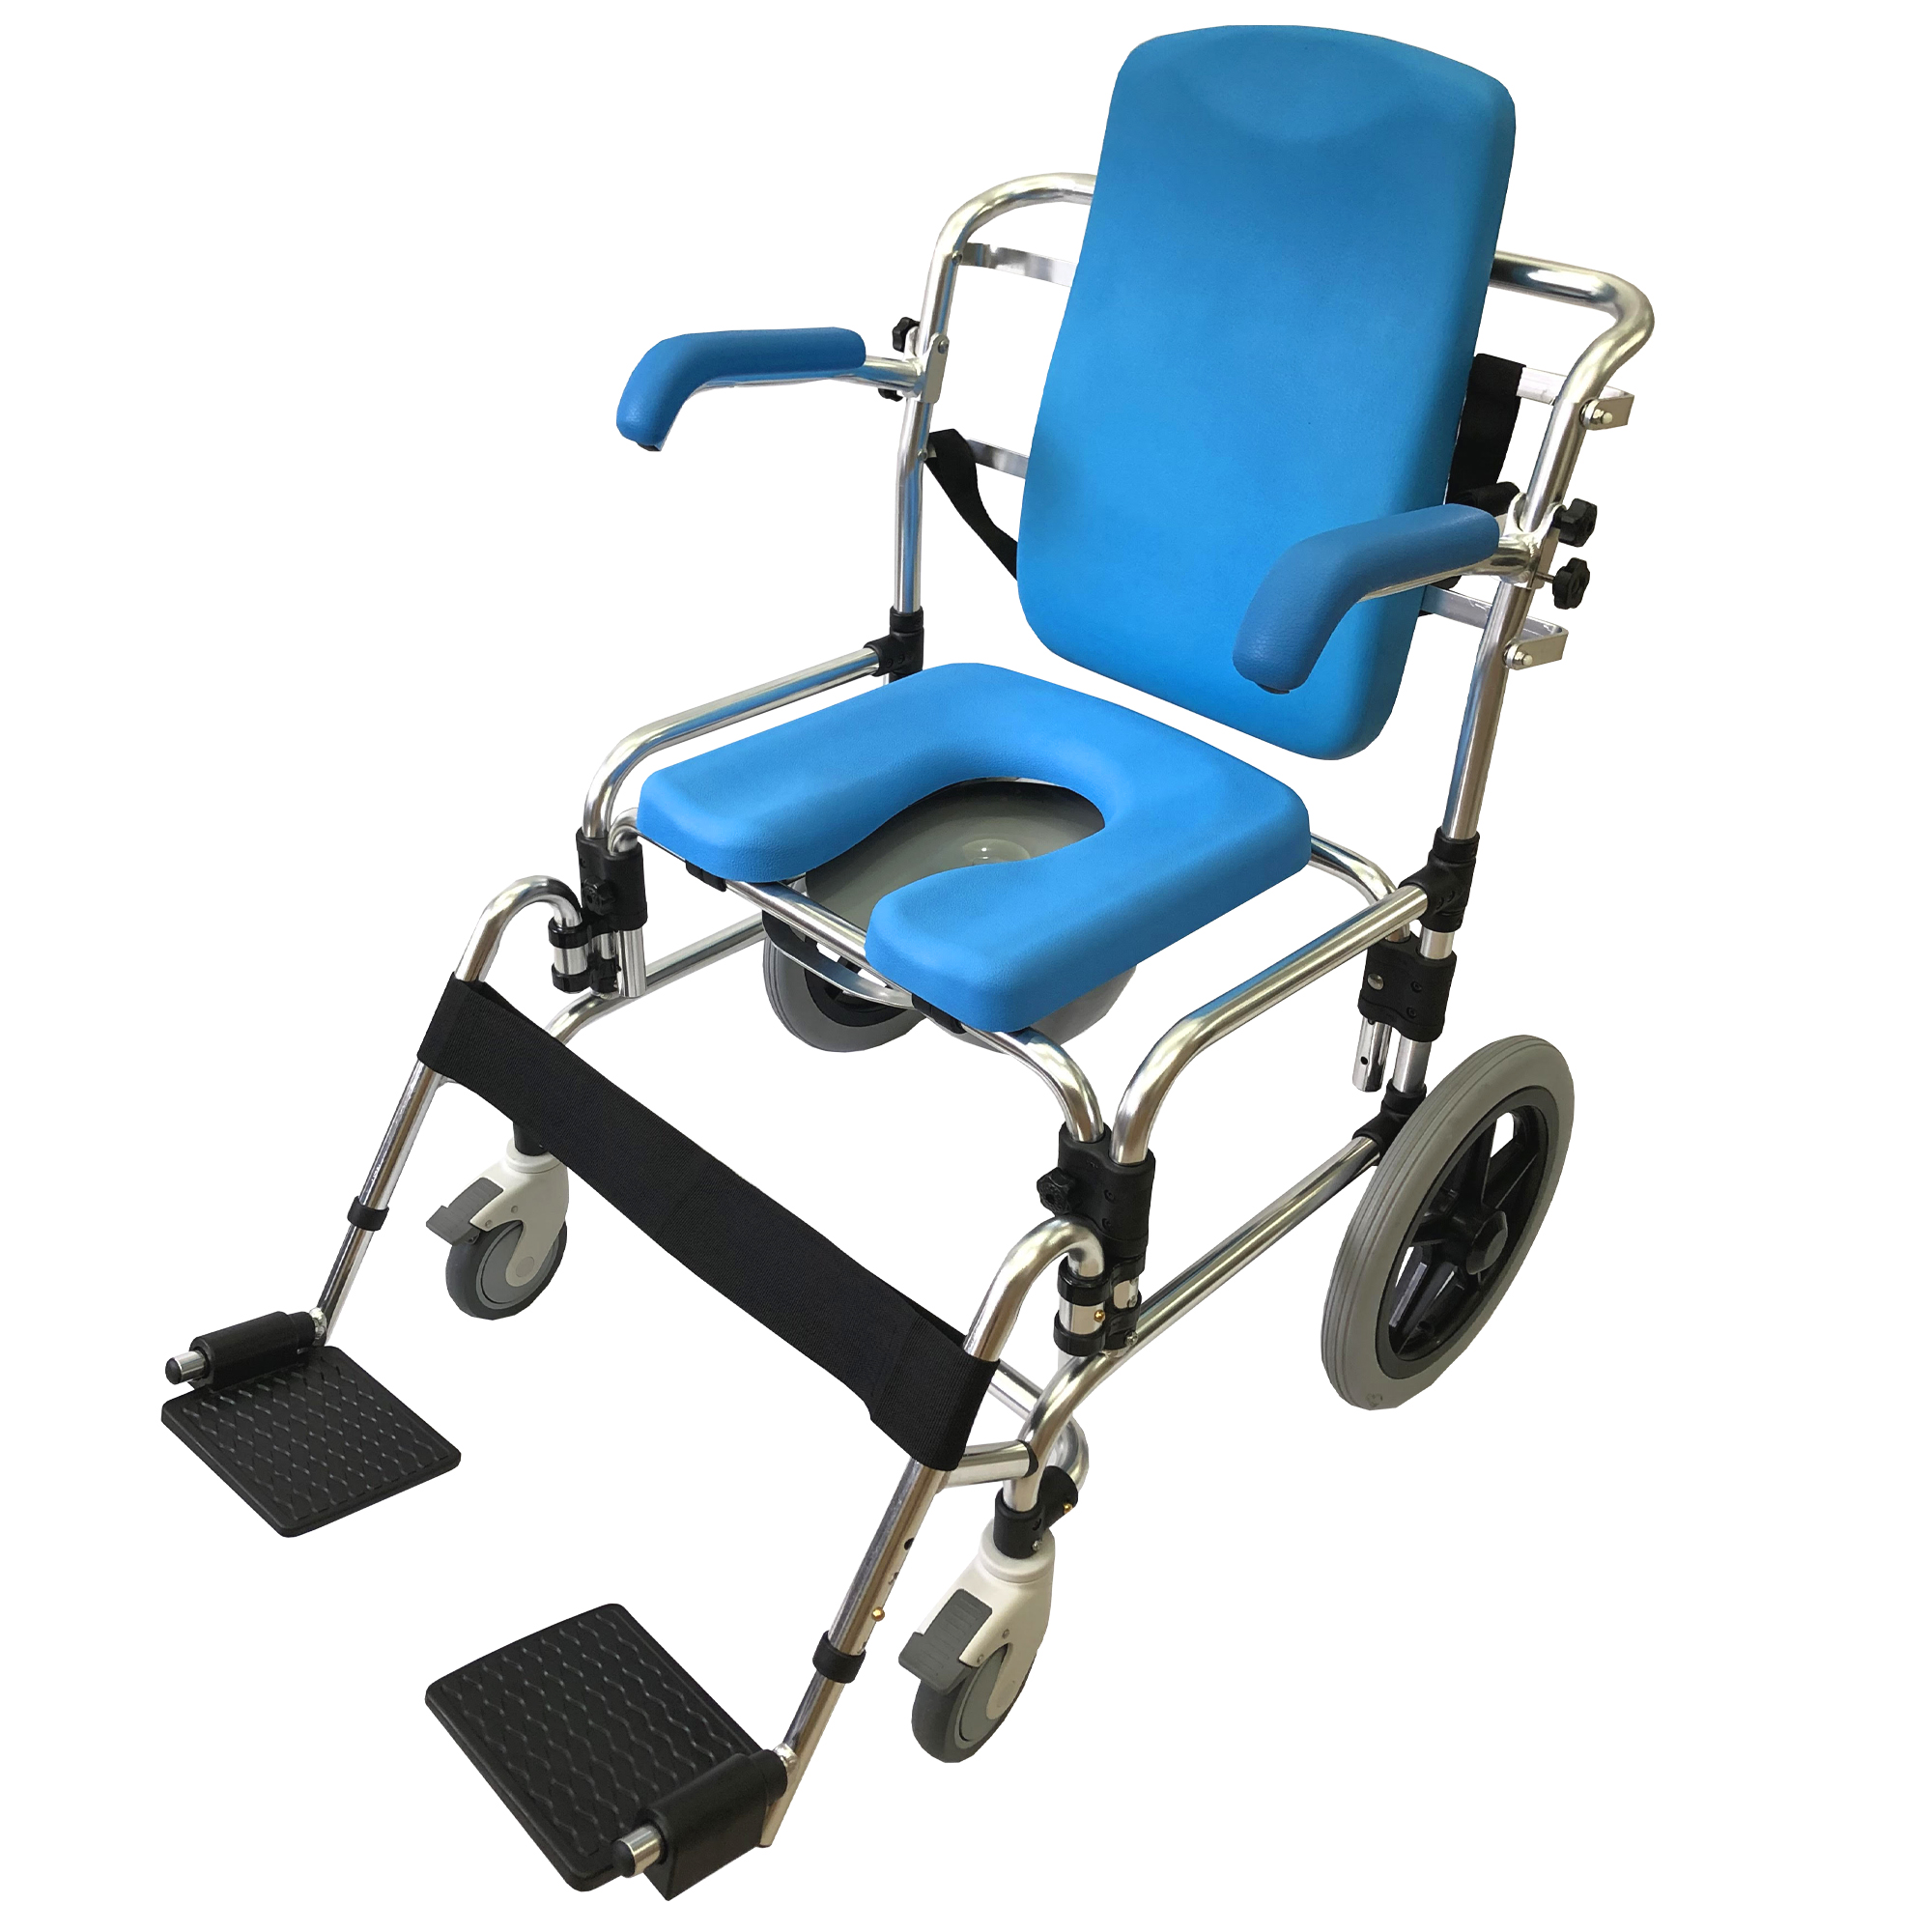 Platinum Health Baltic Professional Transport Shower / Commode / Toilet Padded Chair - image 1 of 5